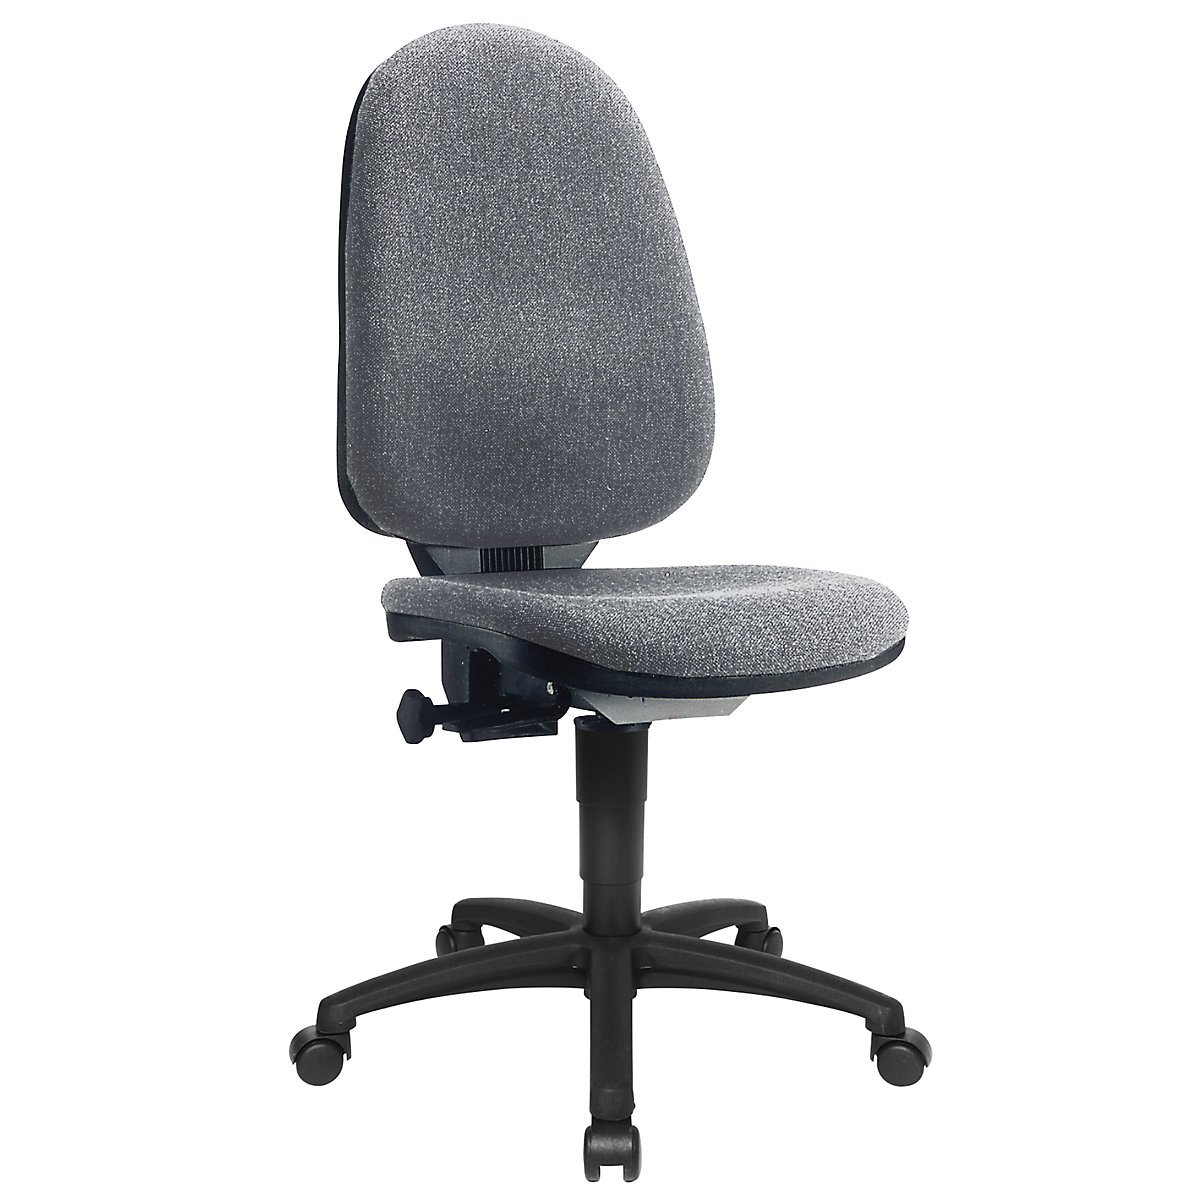 Standard swivel chair – Topstar, without arm rests, back rest 550 mm, frame black, fabric grey, 2+-3